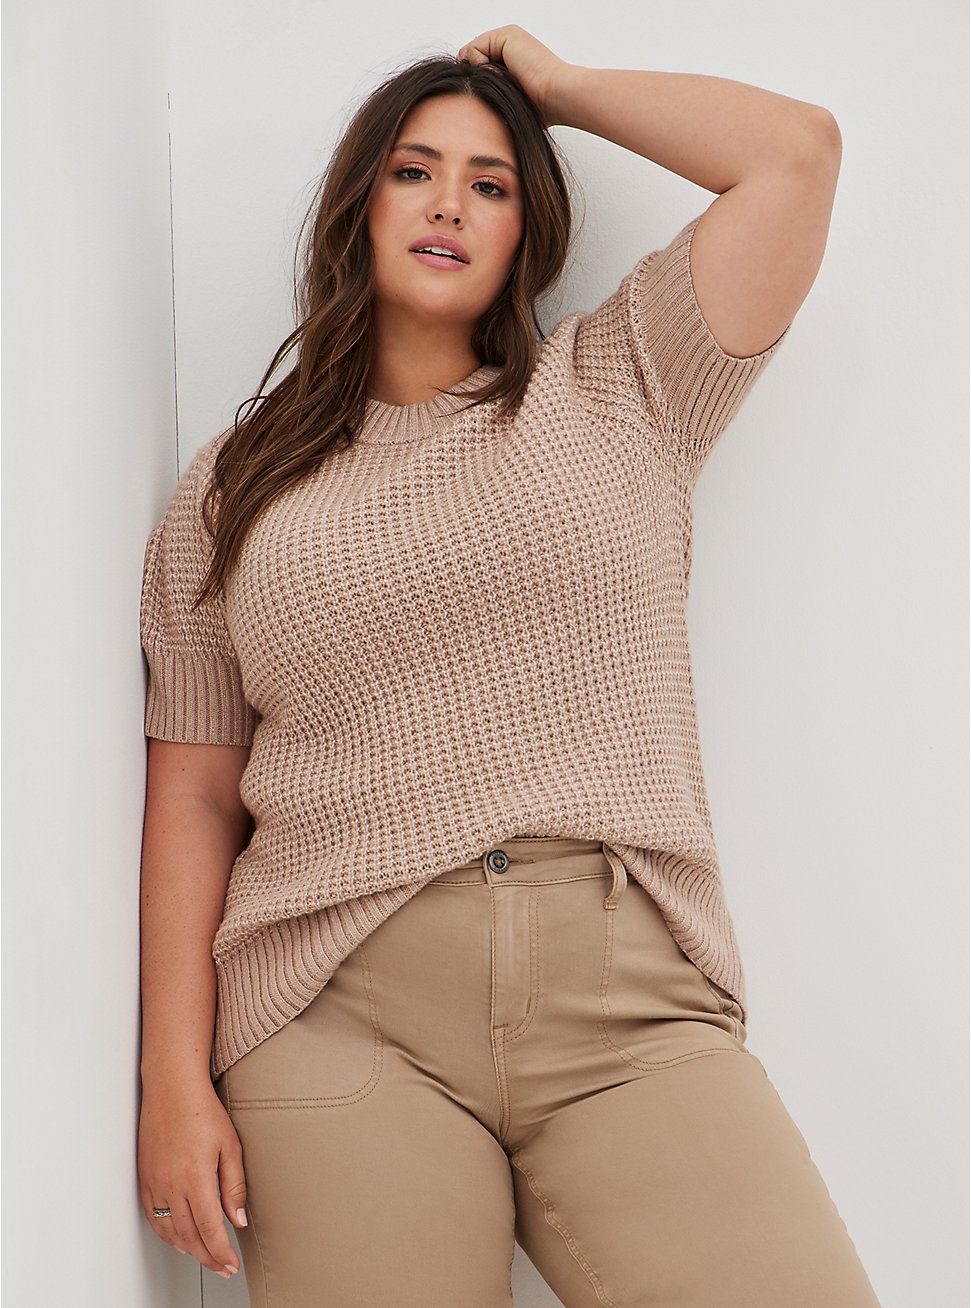 Chunky Pullover Short Sleeve Sweater, BEIGE, hi-res